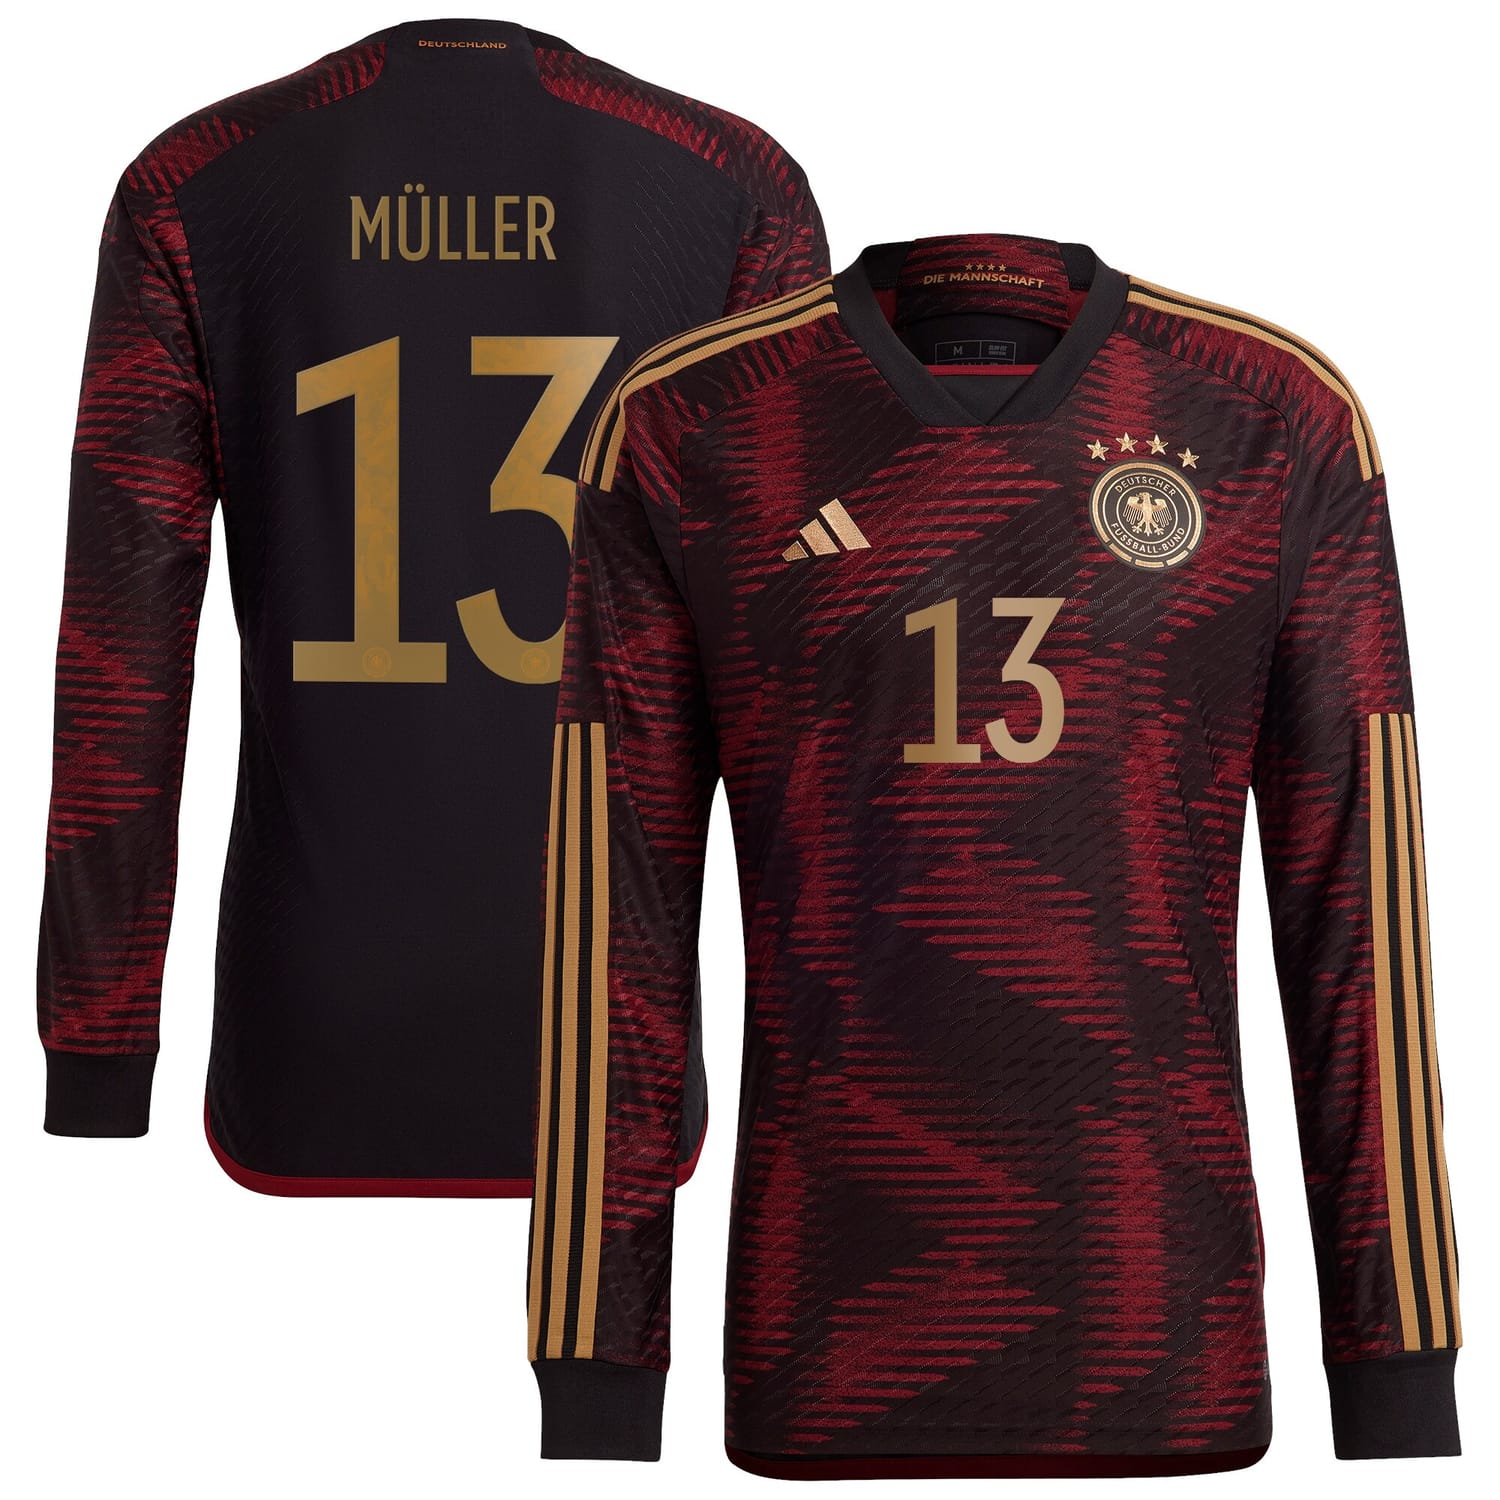 Germany National Team Away Authentic Jersey Shirt Long Sleeve player Thomas Müller 13 printing for Men